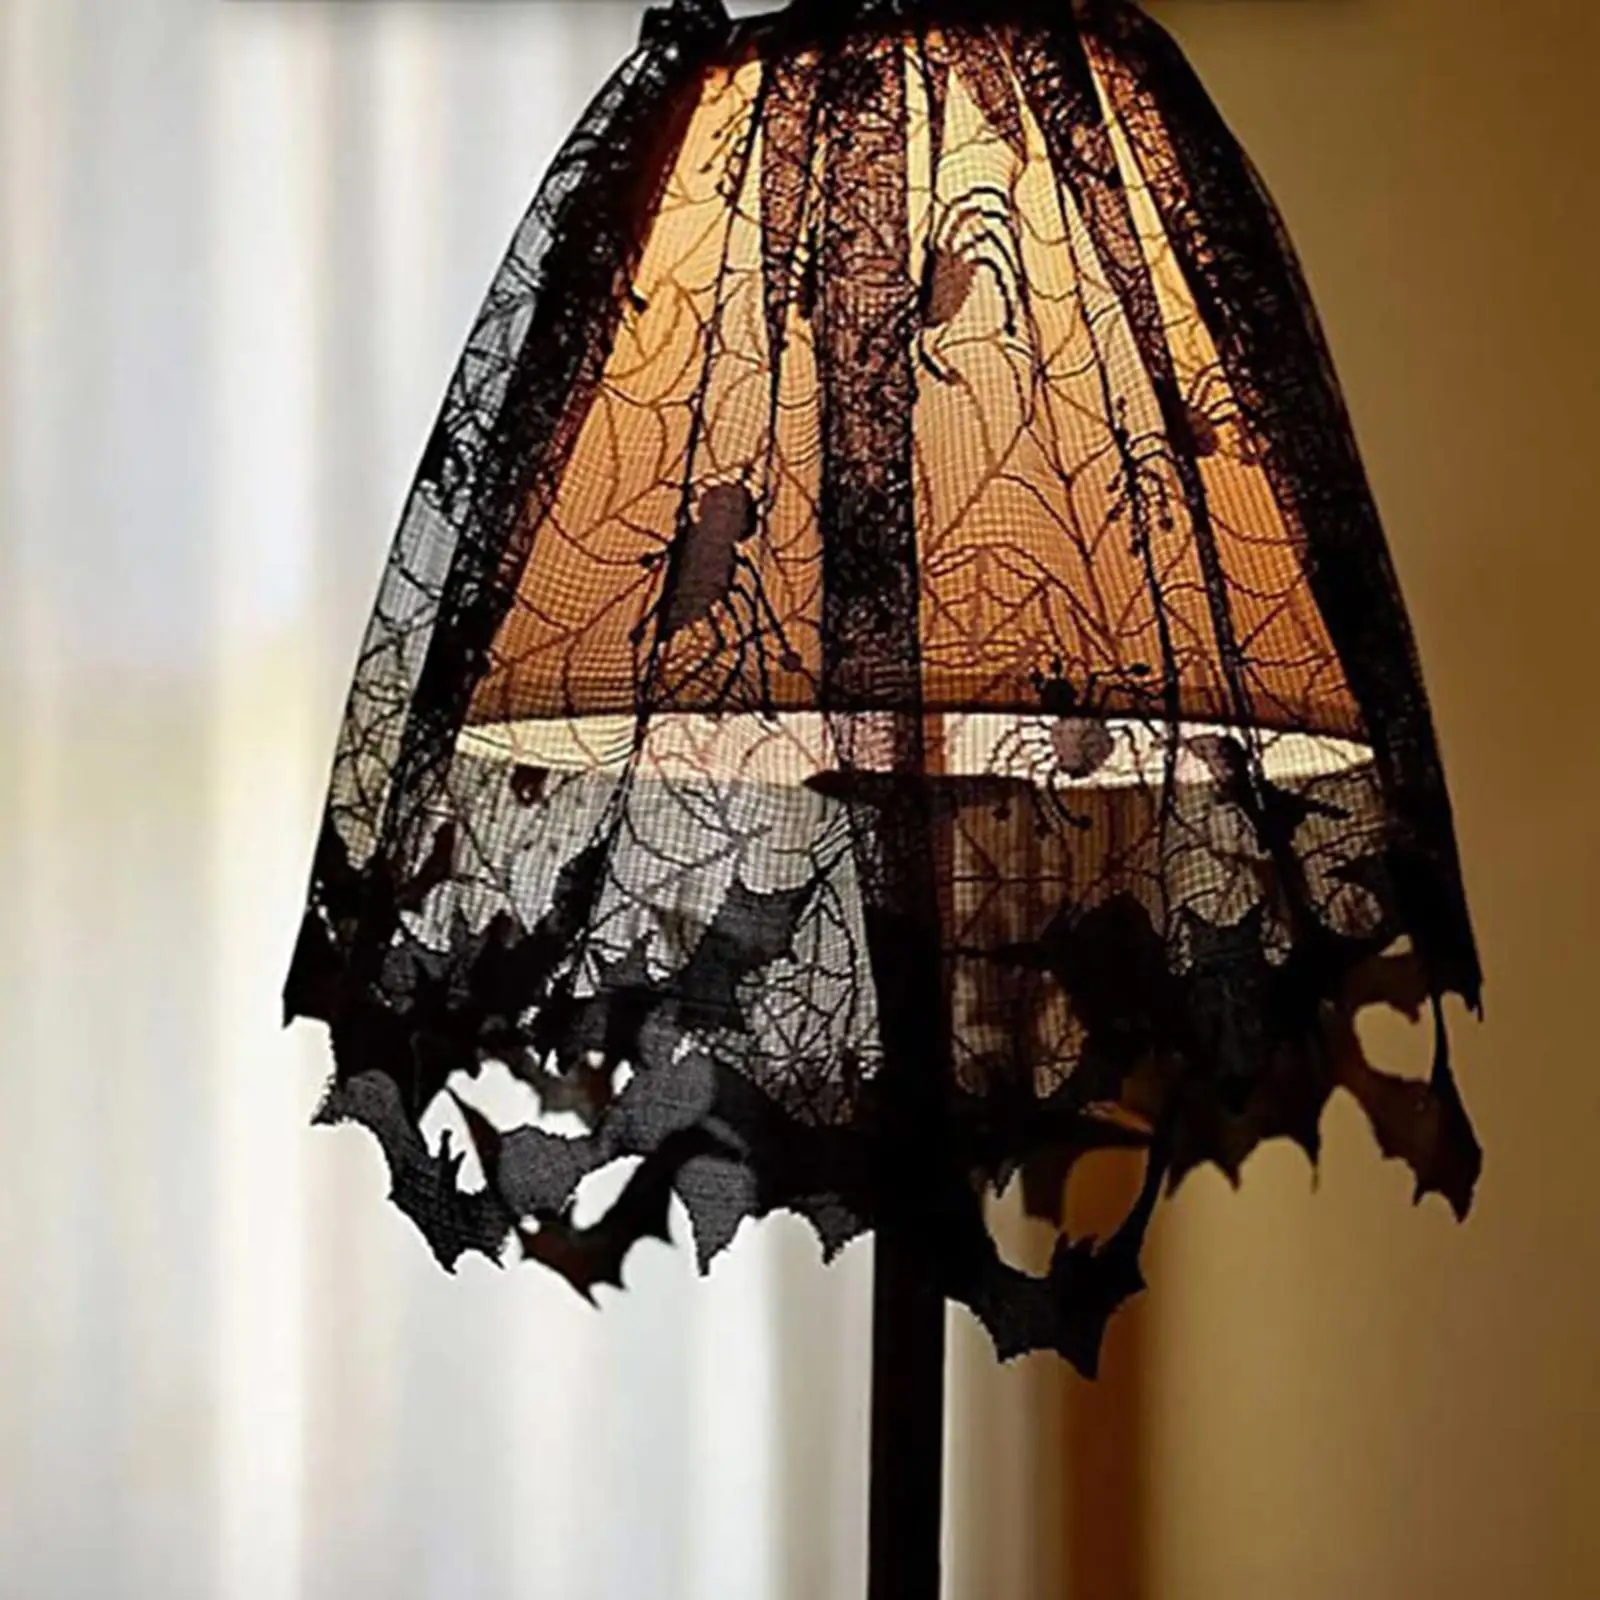 Lampshades Cover Lampshades Halloween Lamp Shade for Decor Halloween Party